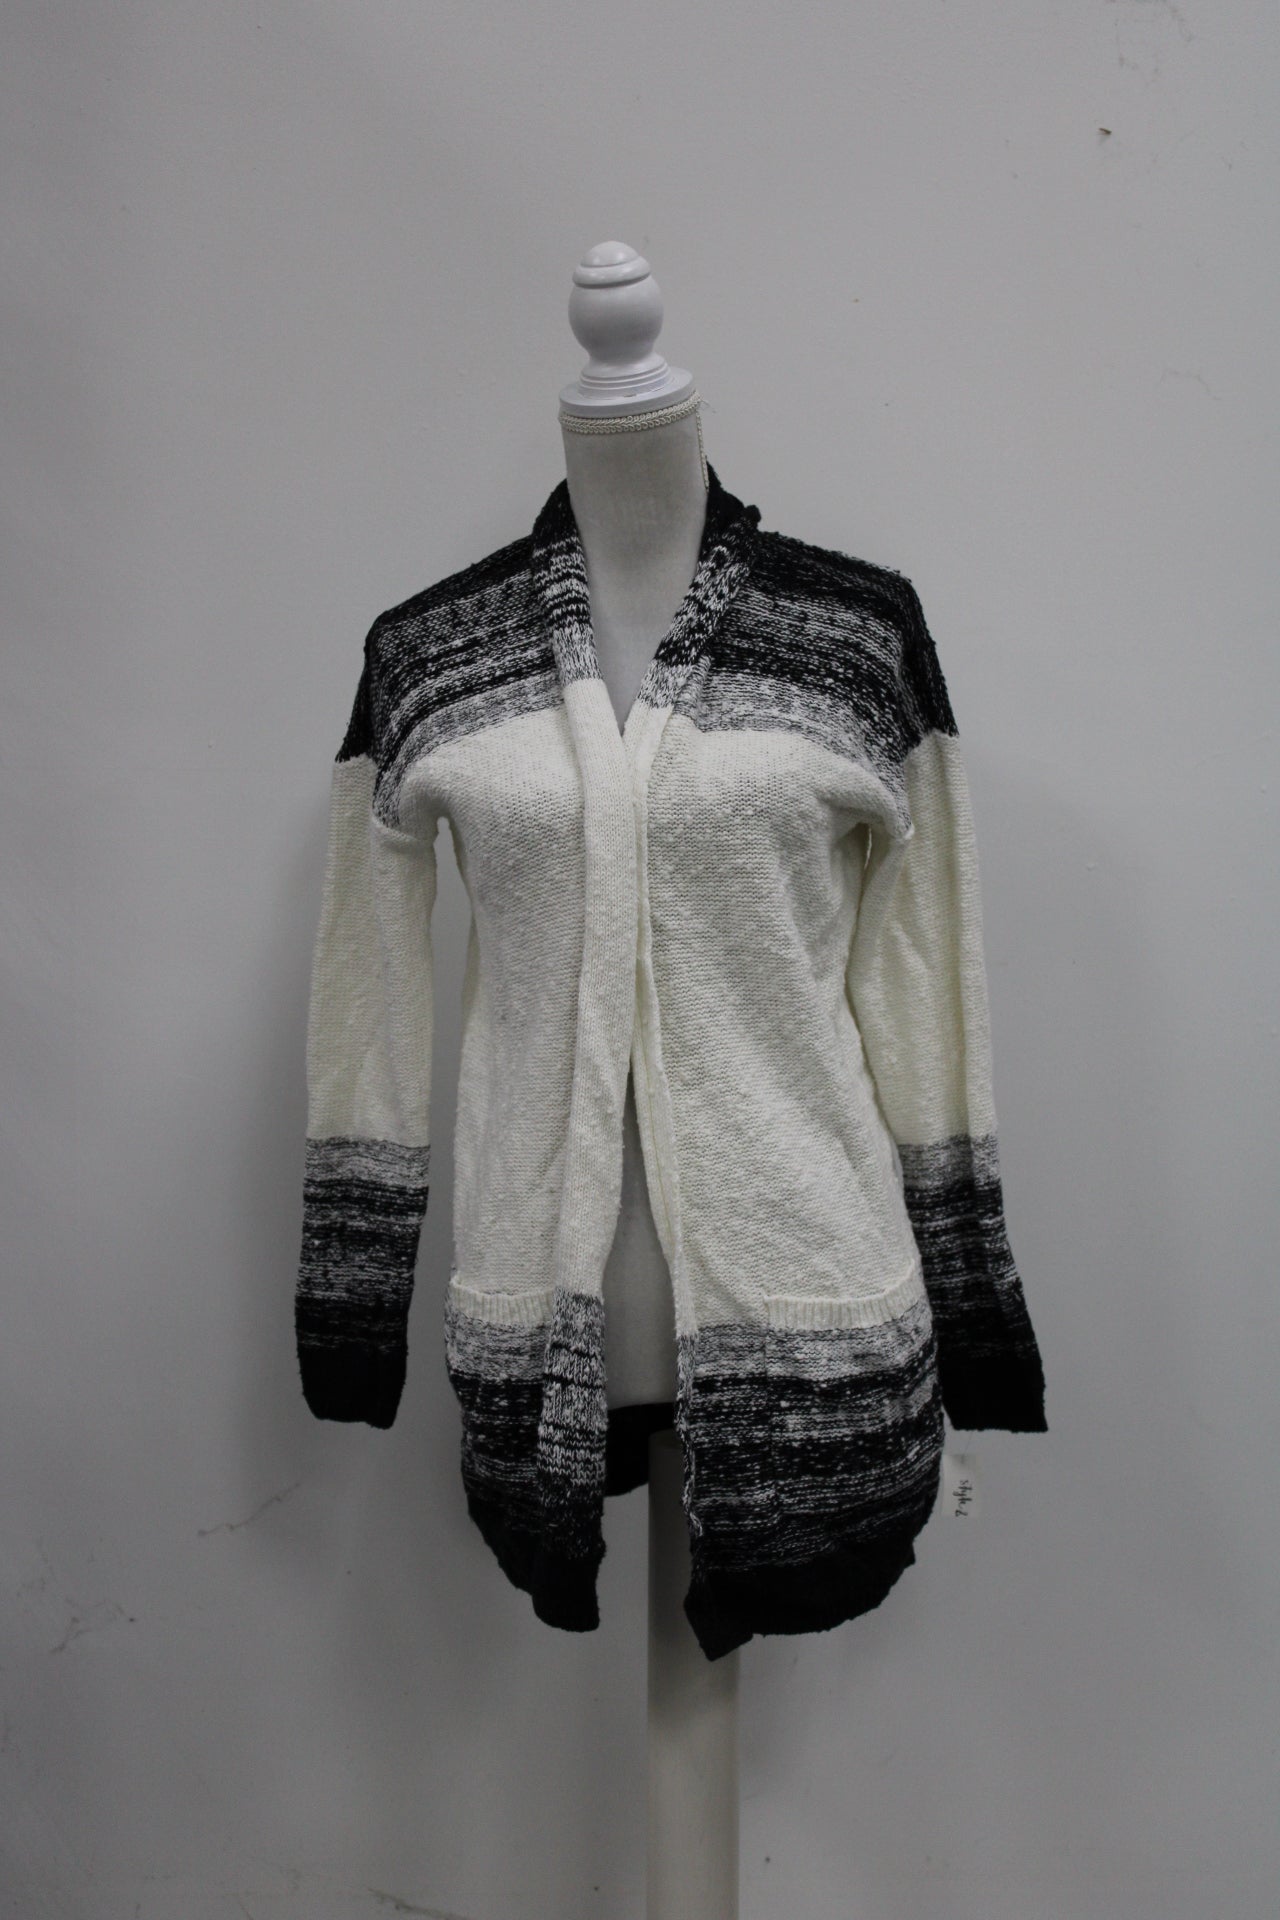 STYLE & CO Sweater Black/White Openfront Cardigan Black S